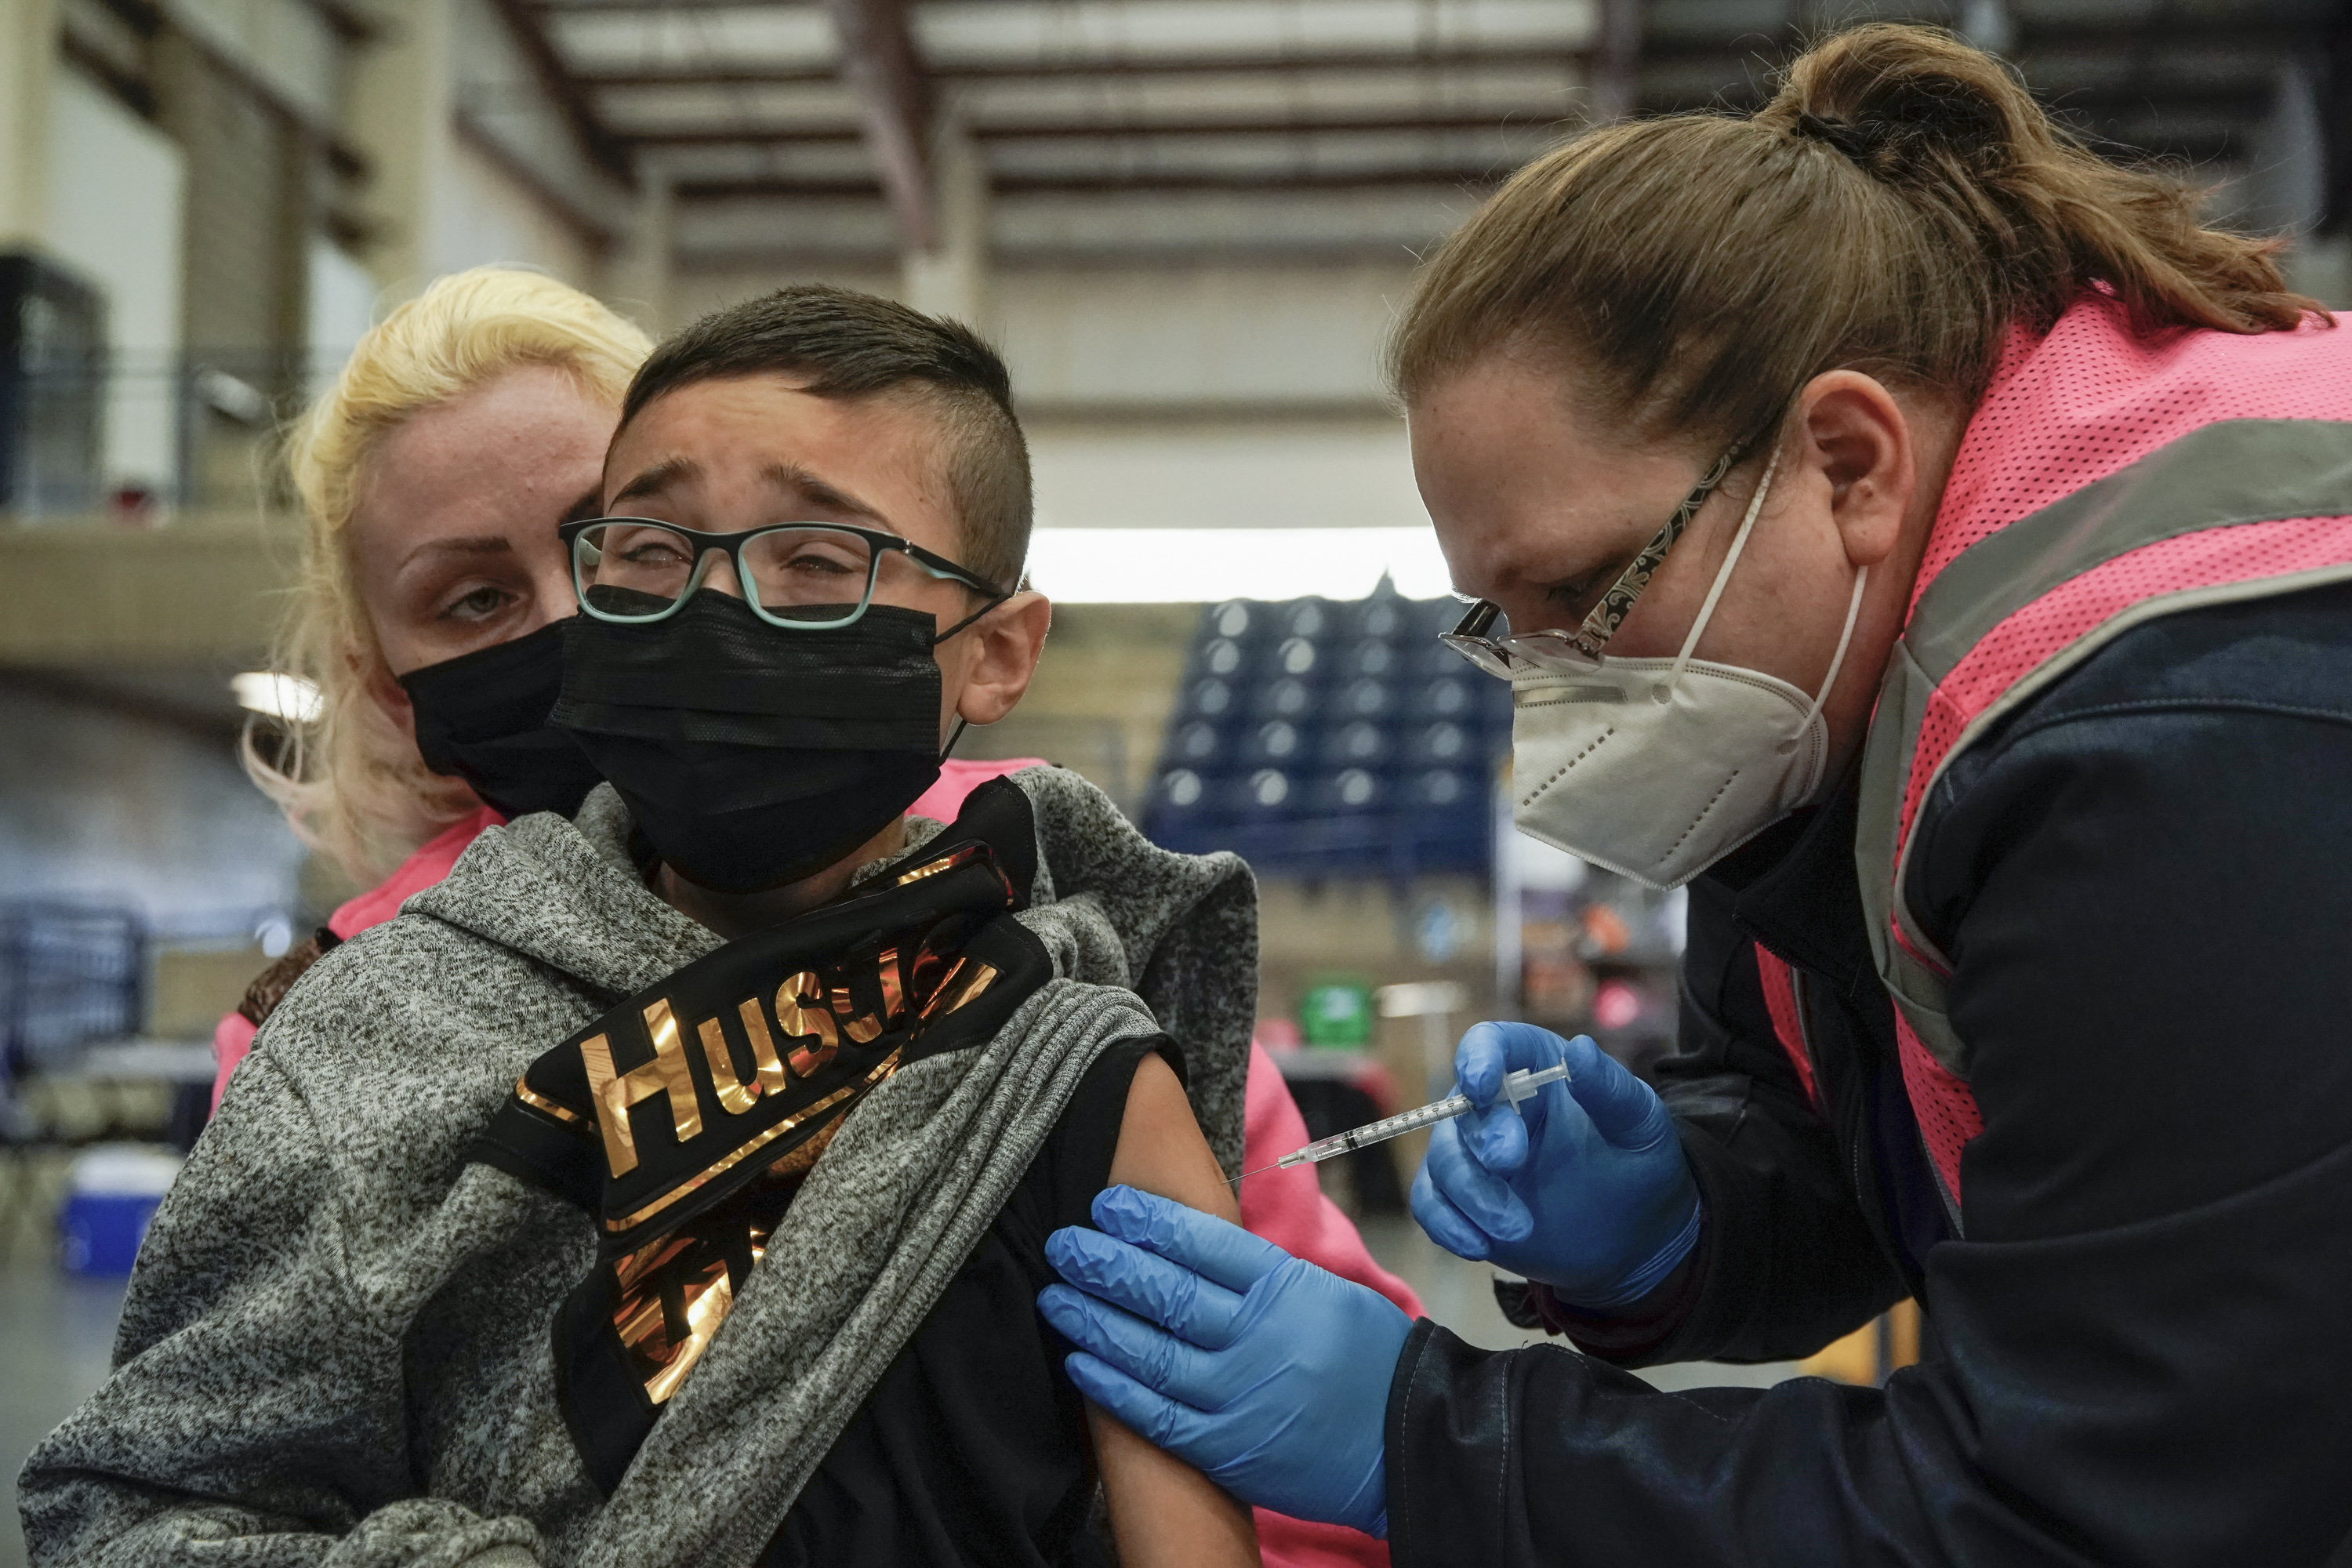 Registered nurse Clarece Glanville gives Daymien Dennis-Garcia, 9, his first dose of COVID-19 vaccine as his sister, Kalizsa, holds him at the Legacy Events Center in Farmington on Monday, Jan. 24, 2022.